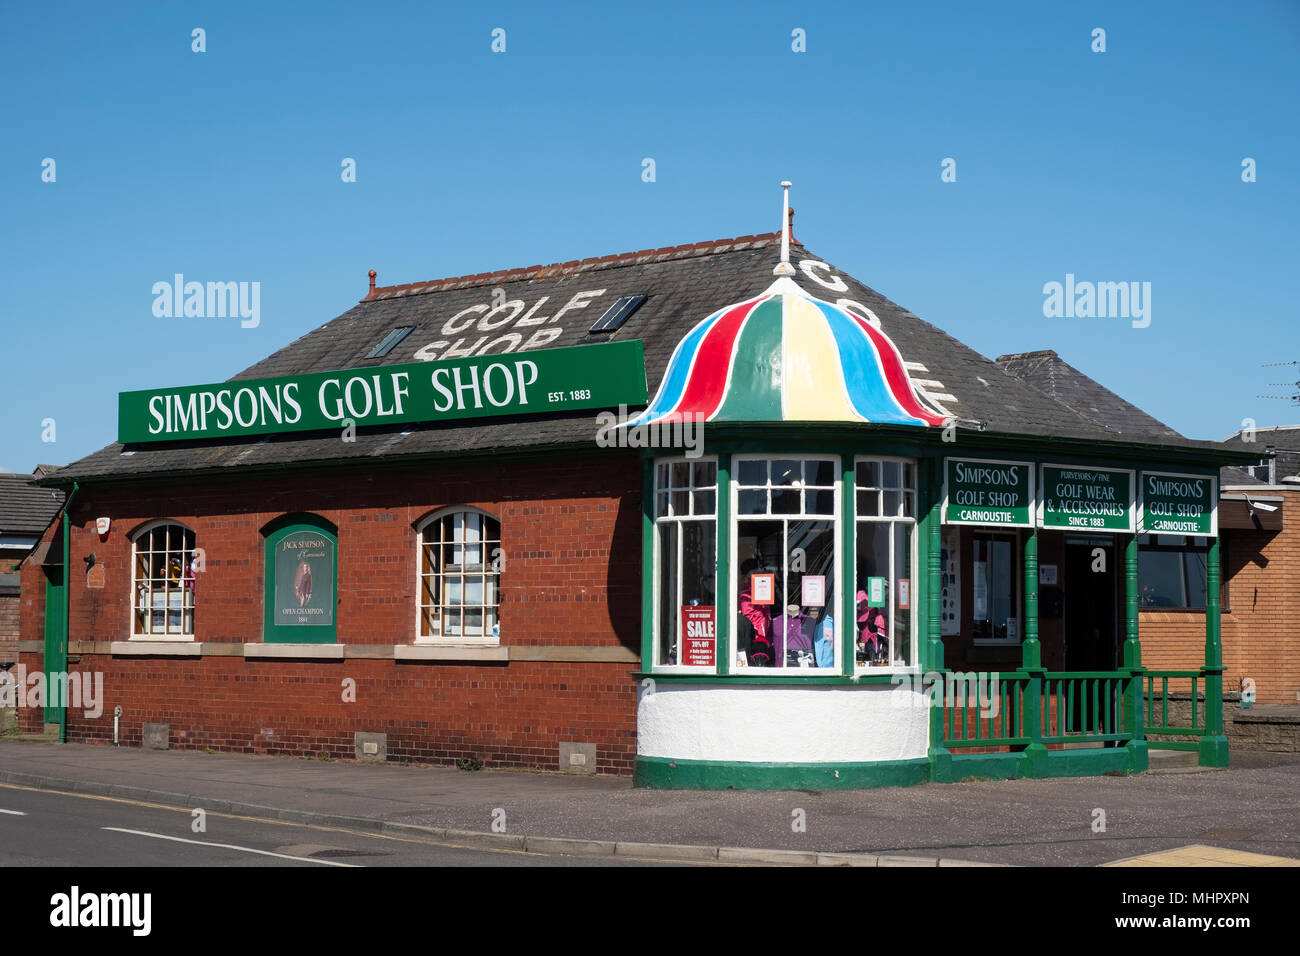 Exterior view of historic Simpsons Golf Shop beside Carnoustie Golf Links (course) in Carnoustie, Angus, Scotland, United Kingdom Stock Photo